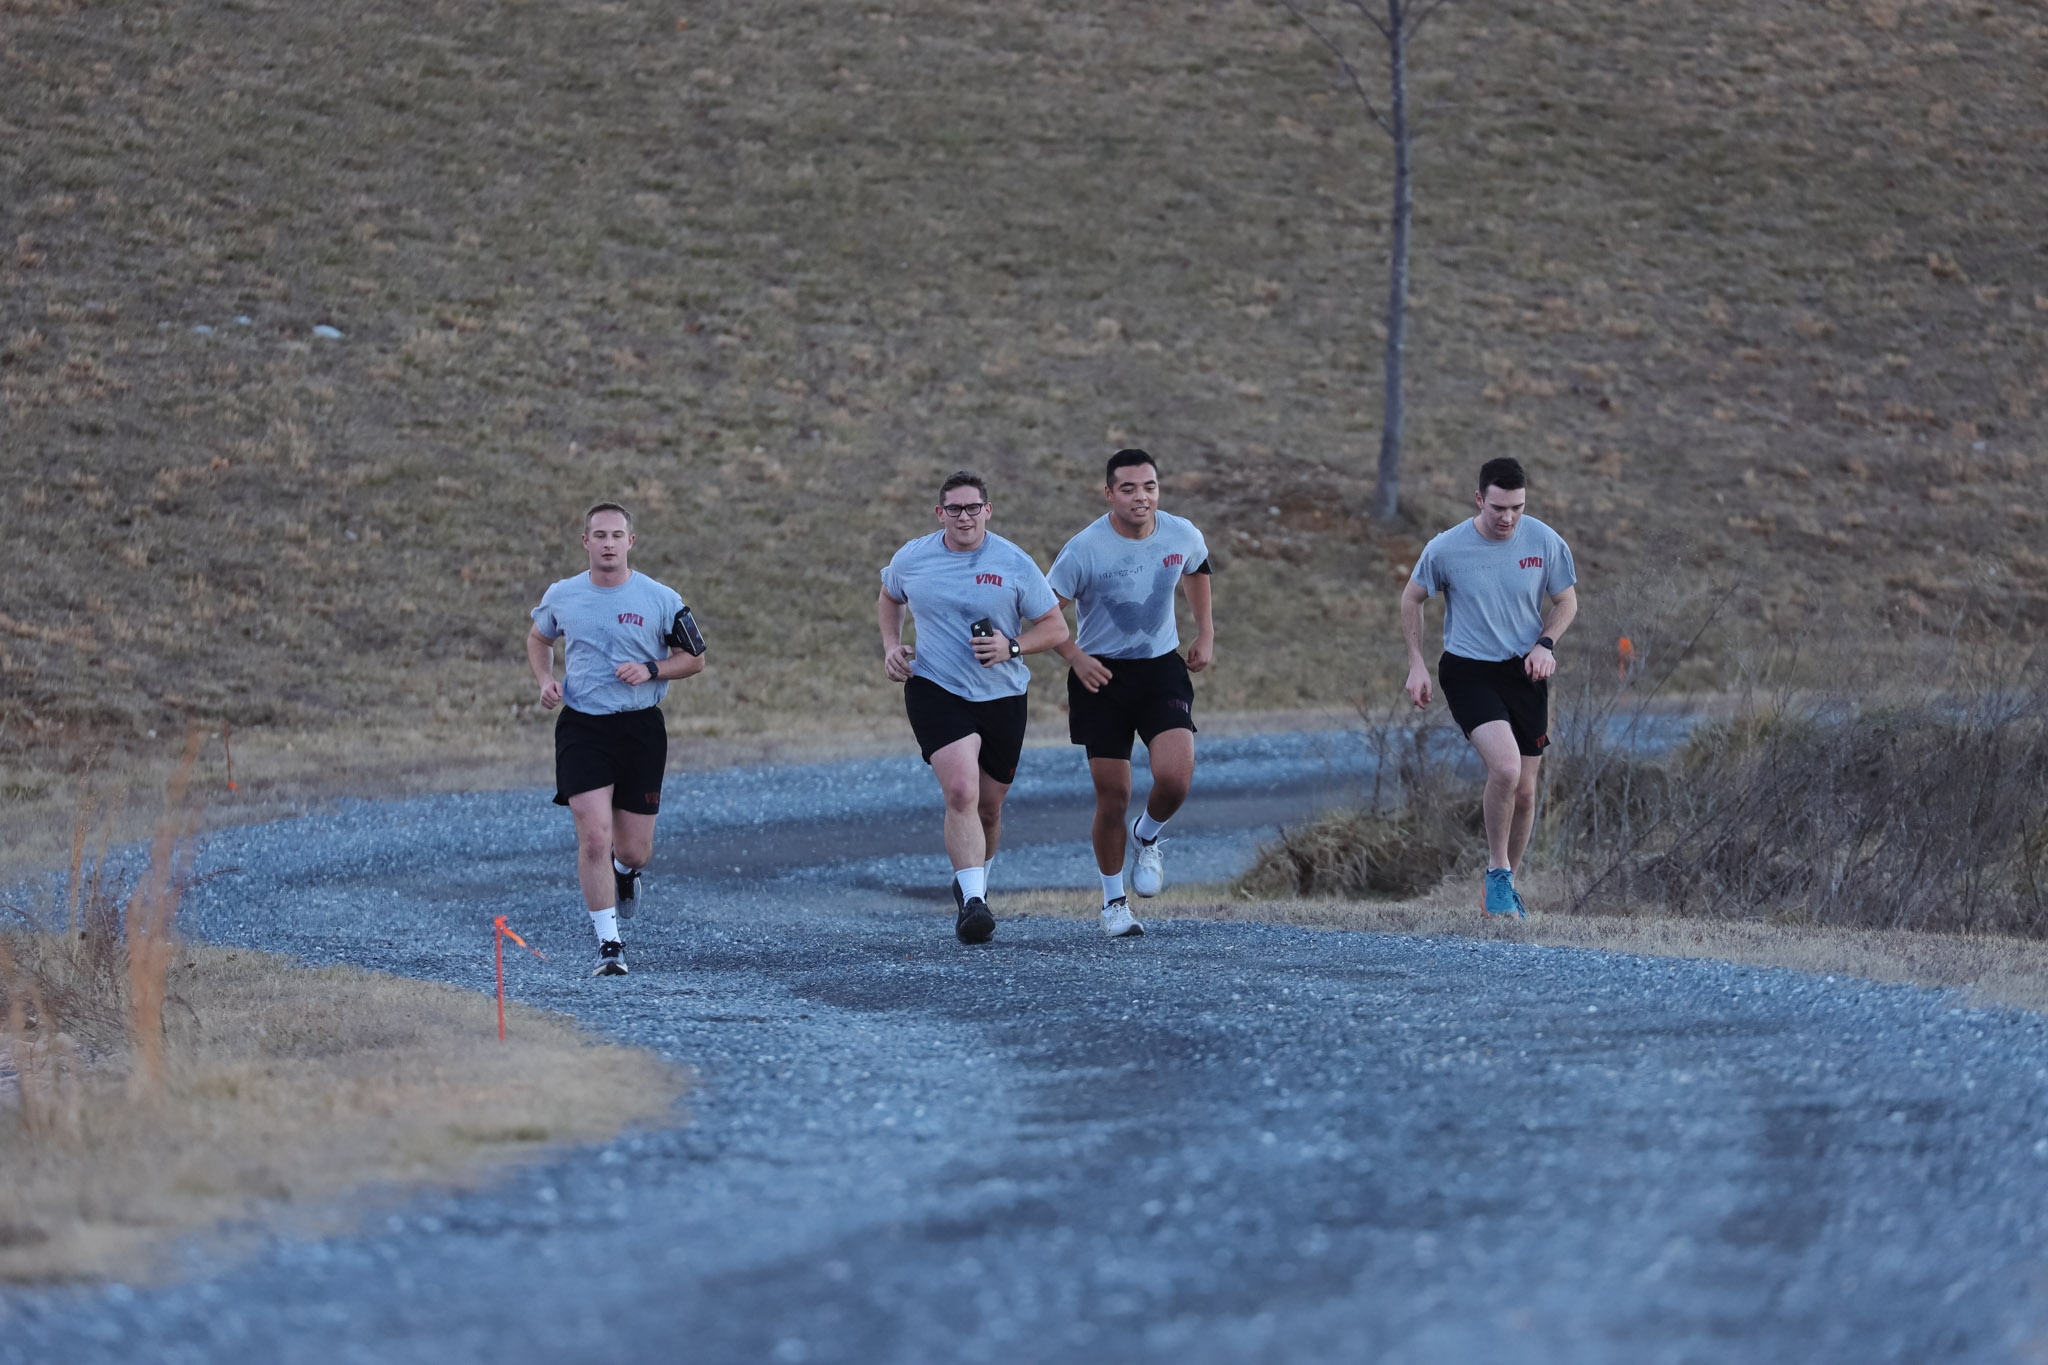 Students part of the Marathon Club at ϲ, a military college in Virginia